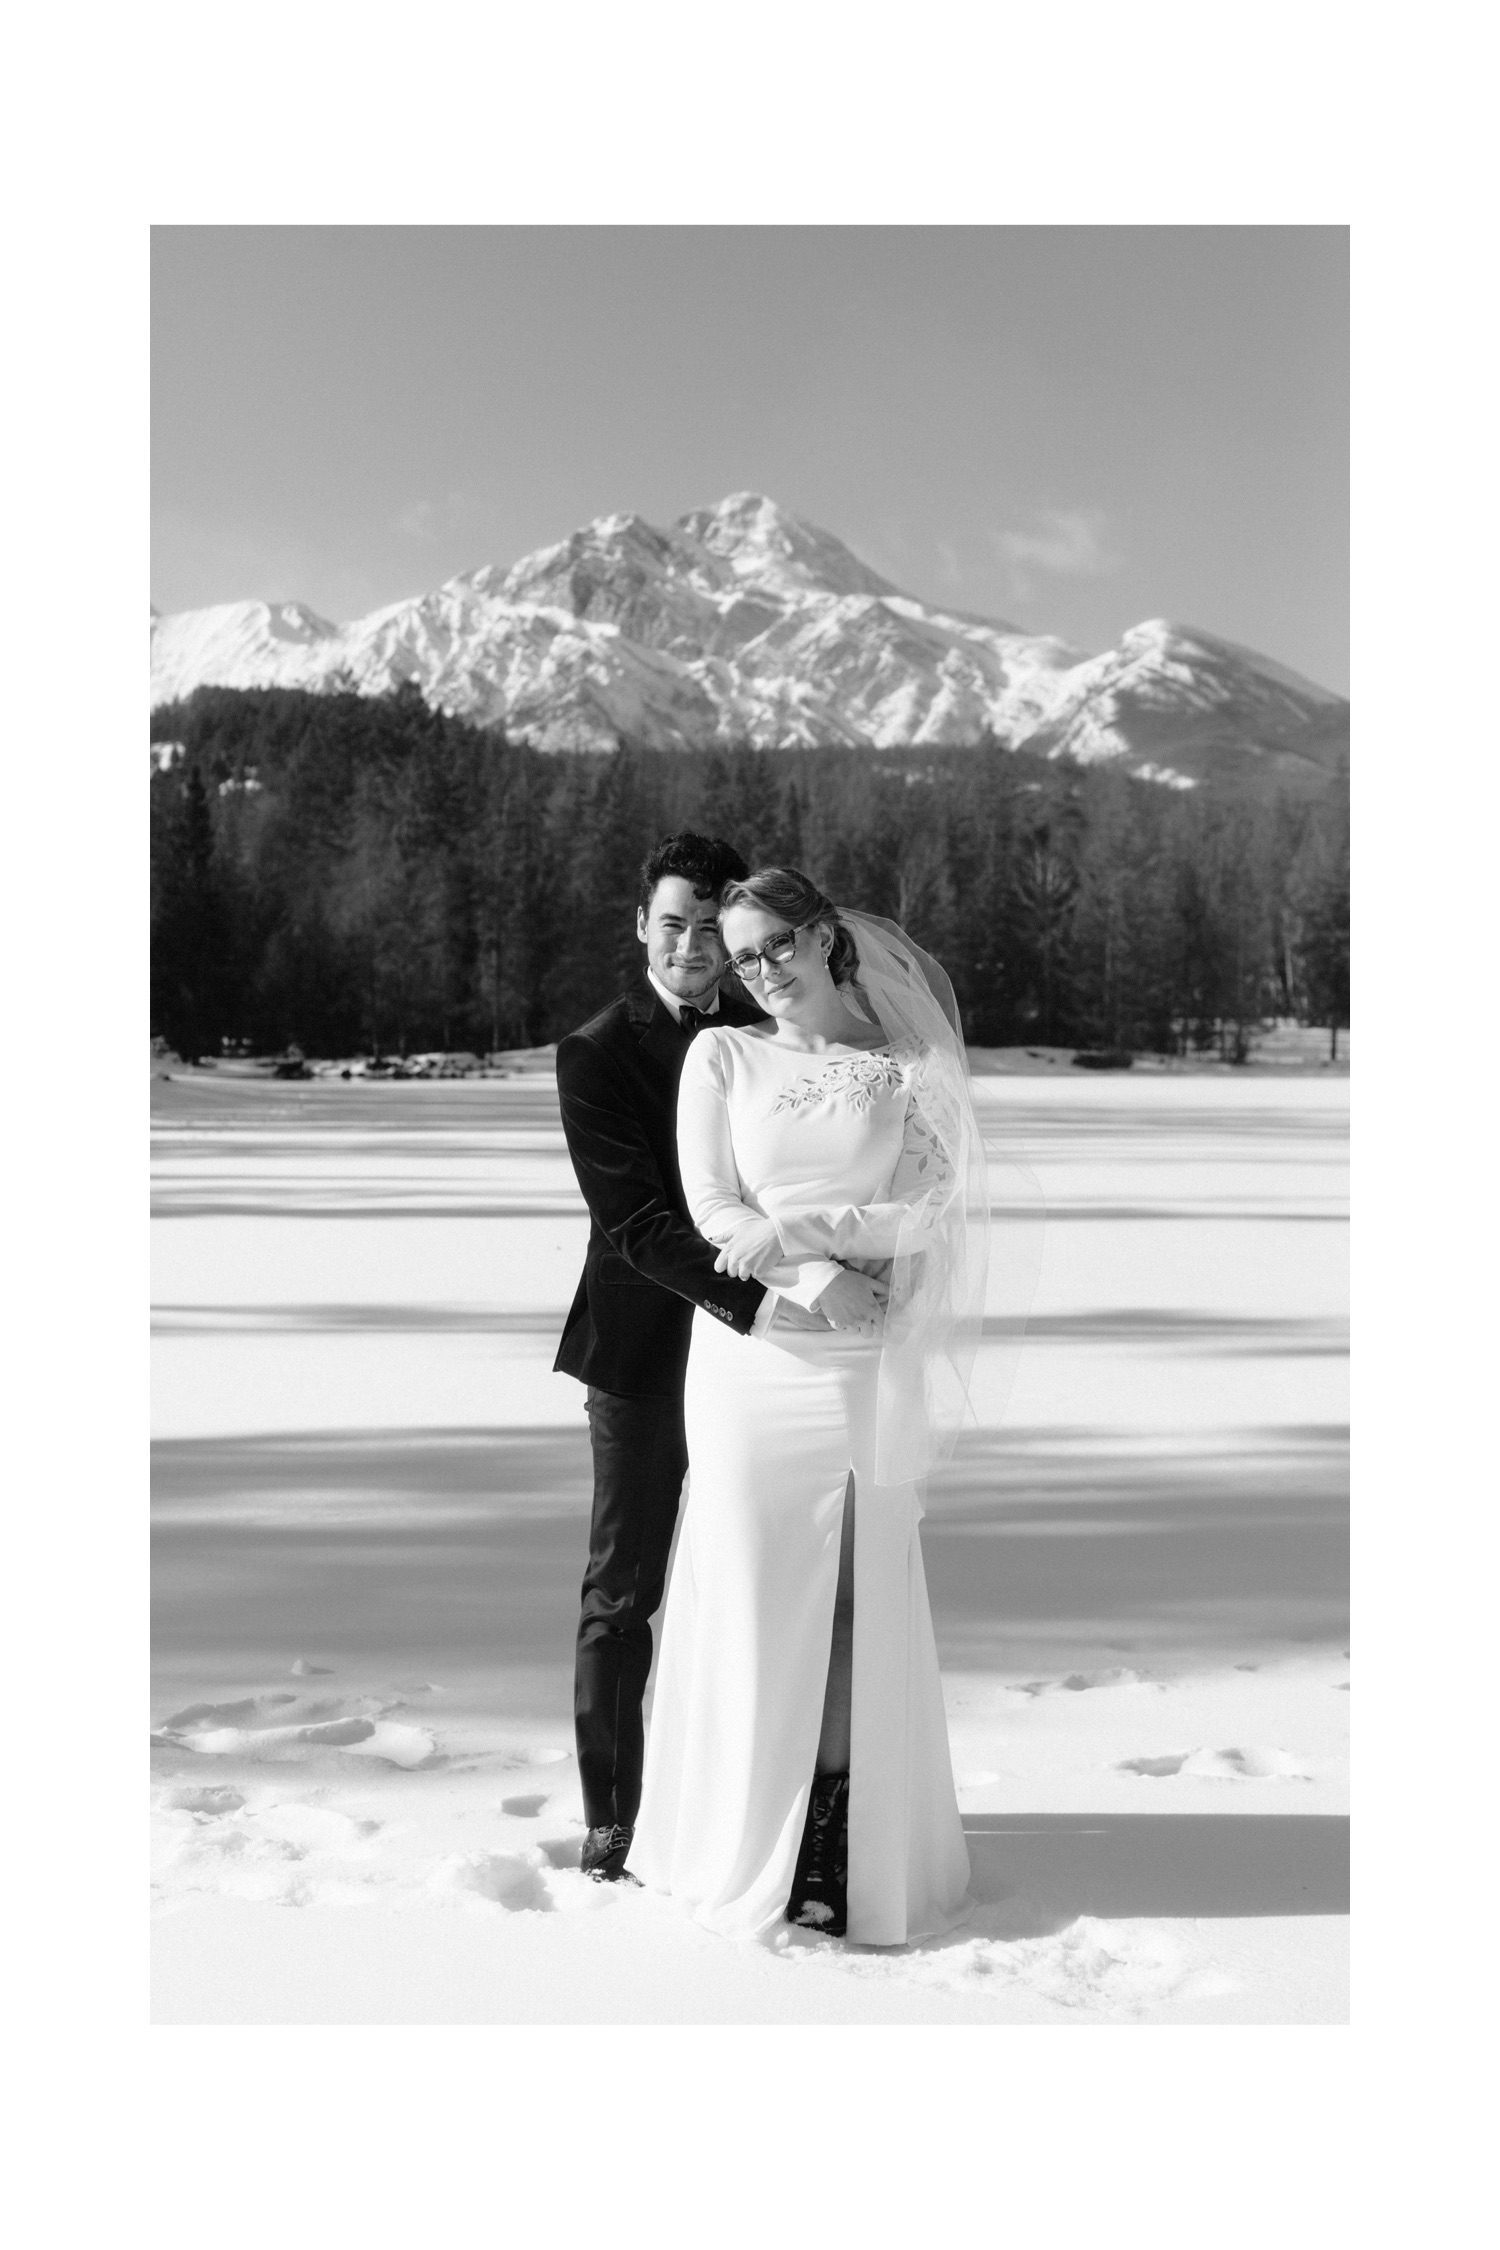 Classic wedding portraiture on a frozen lake in Canada overlooking Pyramid Mountain